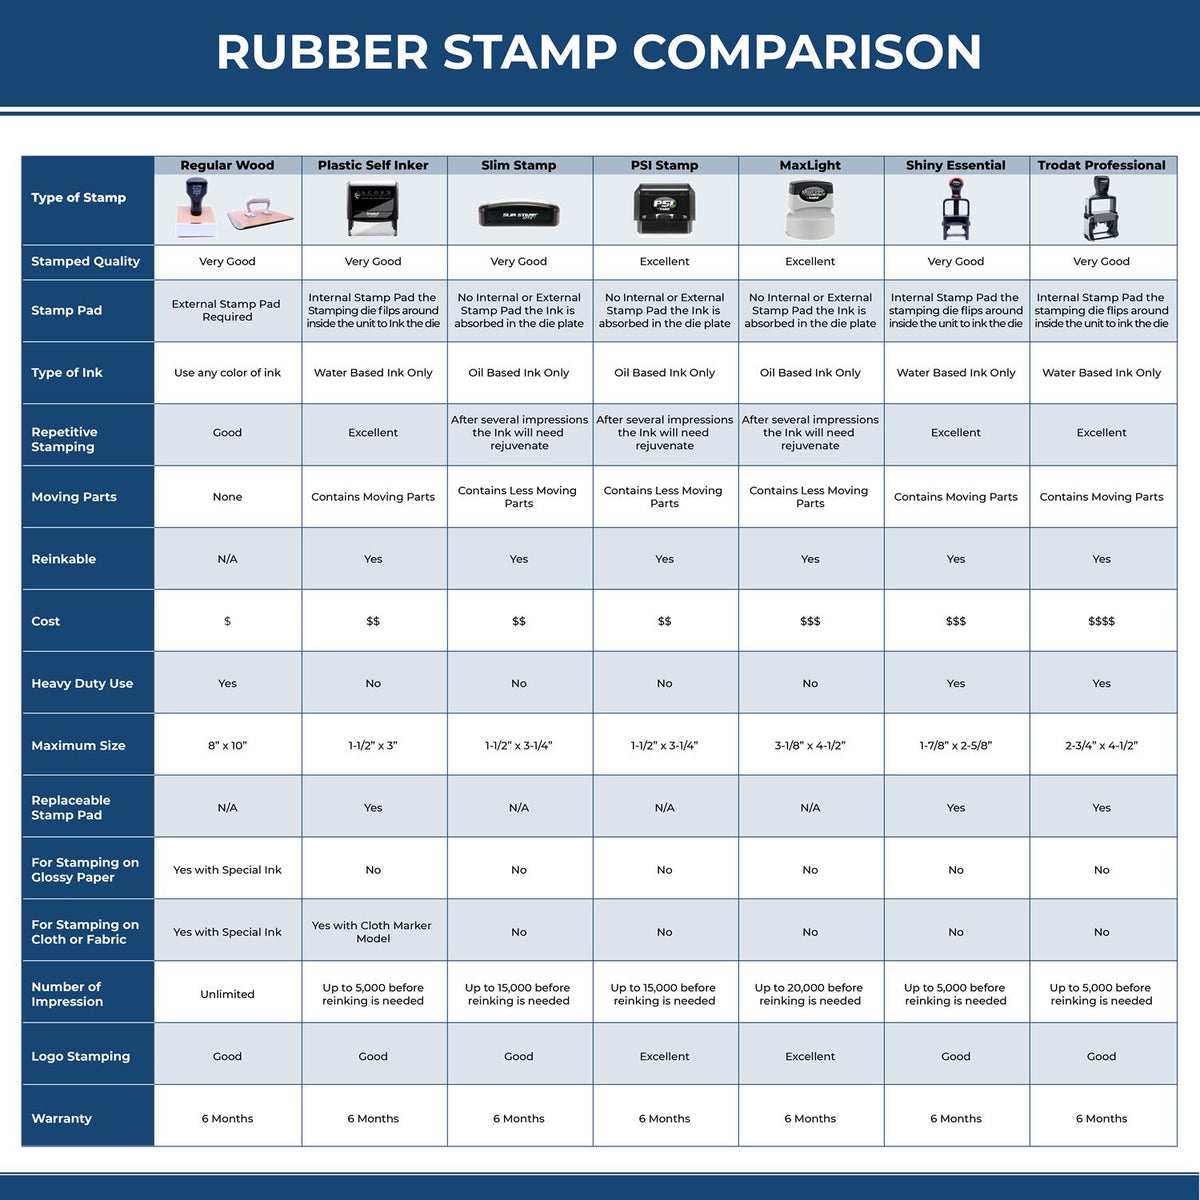 A comparison chart for the different types of mount models available for the MaxLight Premium Pre-Inked Colorado Rectangular Notarial Stamp.